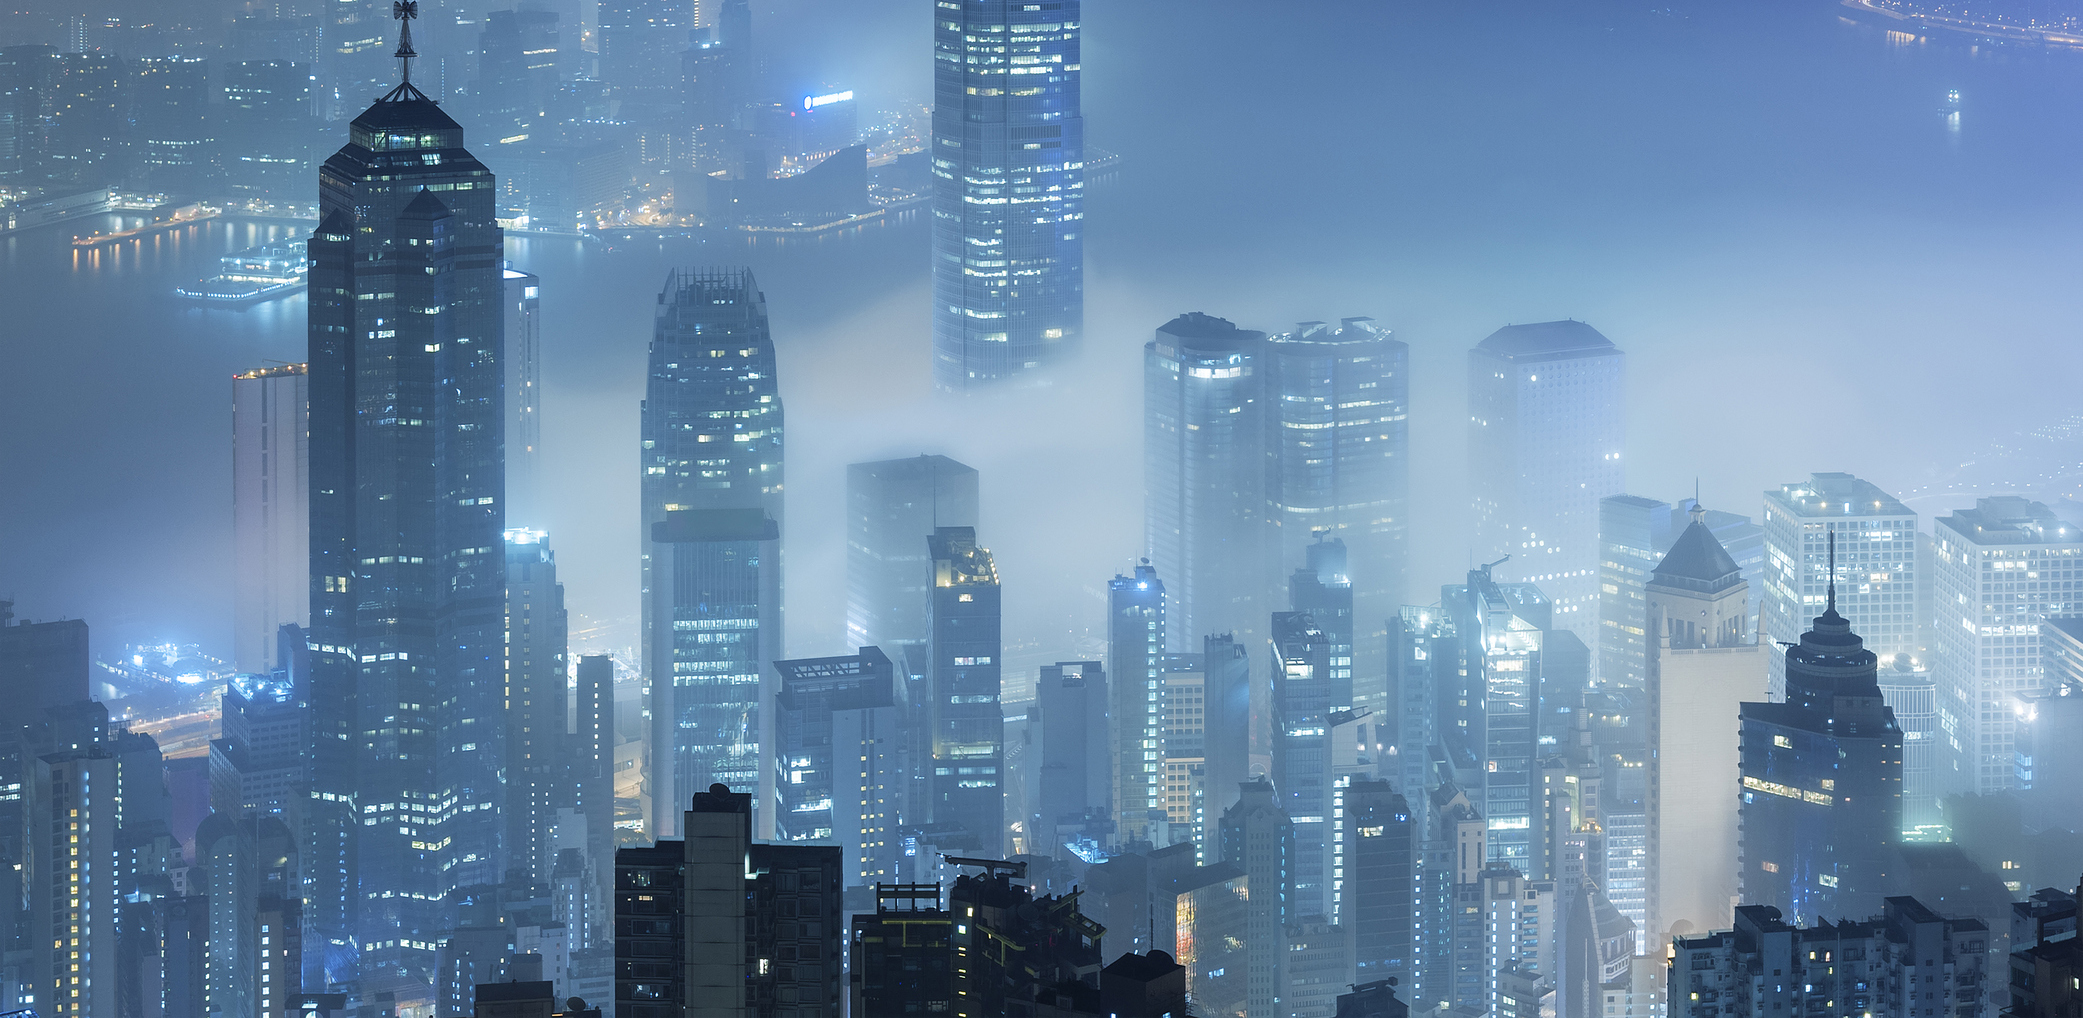 Misty-night-view-of-Hong-Kong-city-cropped